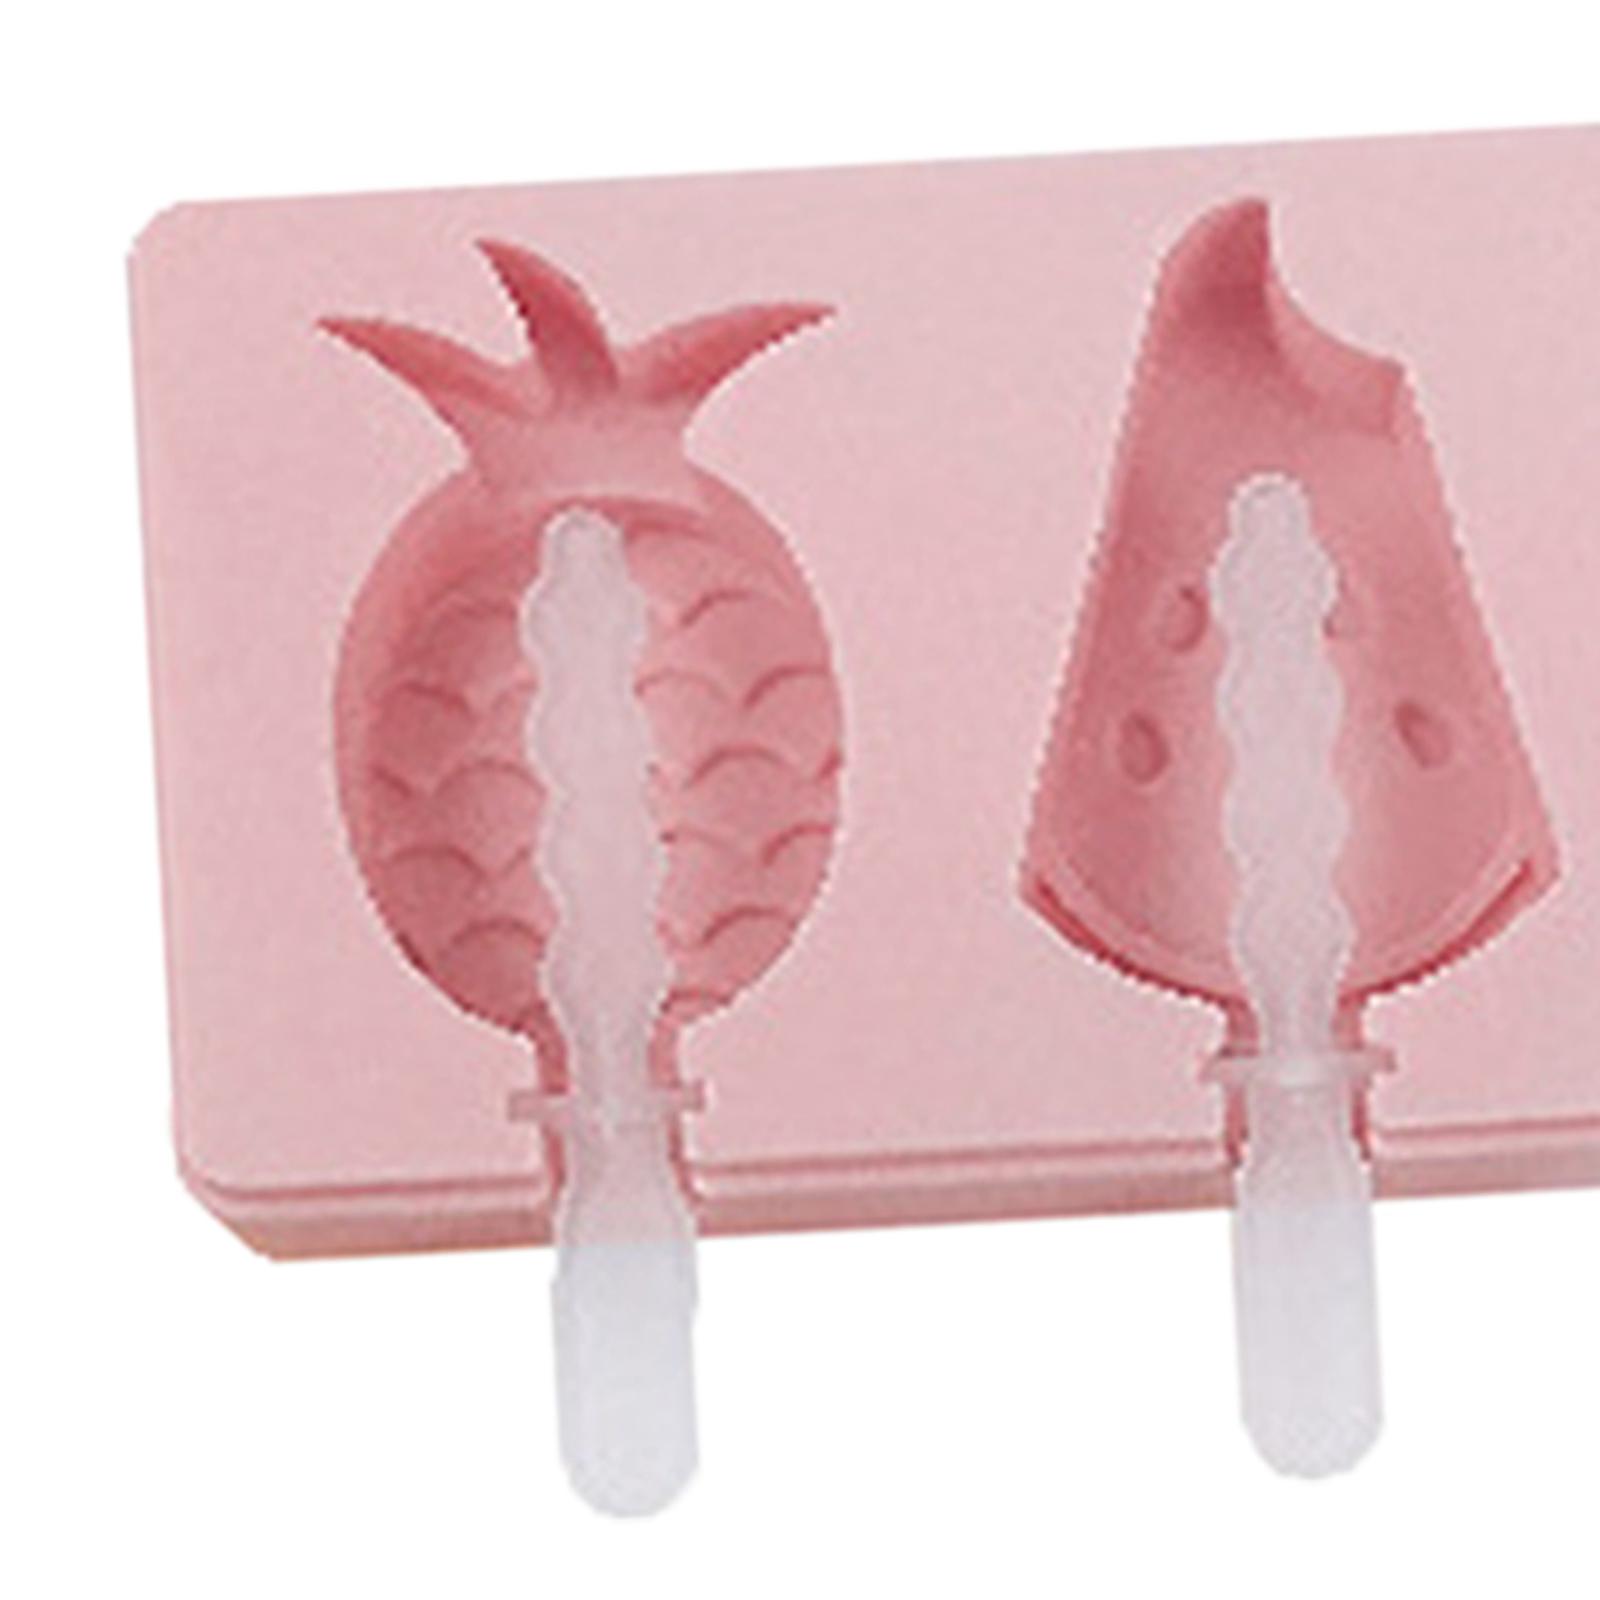 Popsicle maker for Release Cartoon Removable Cute Image Ice Making style D